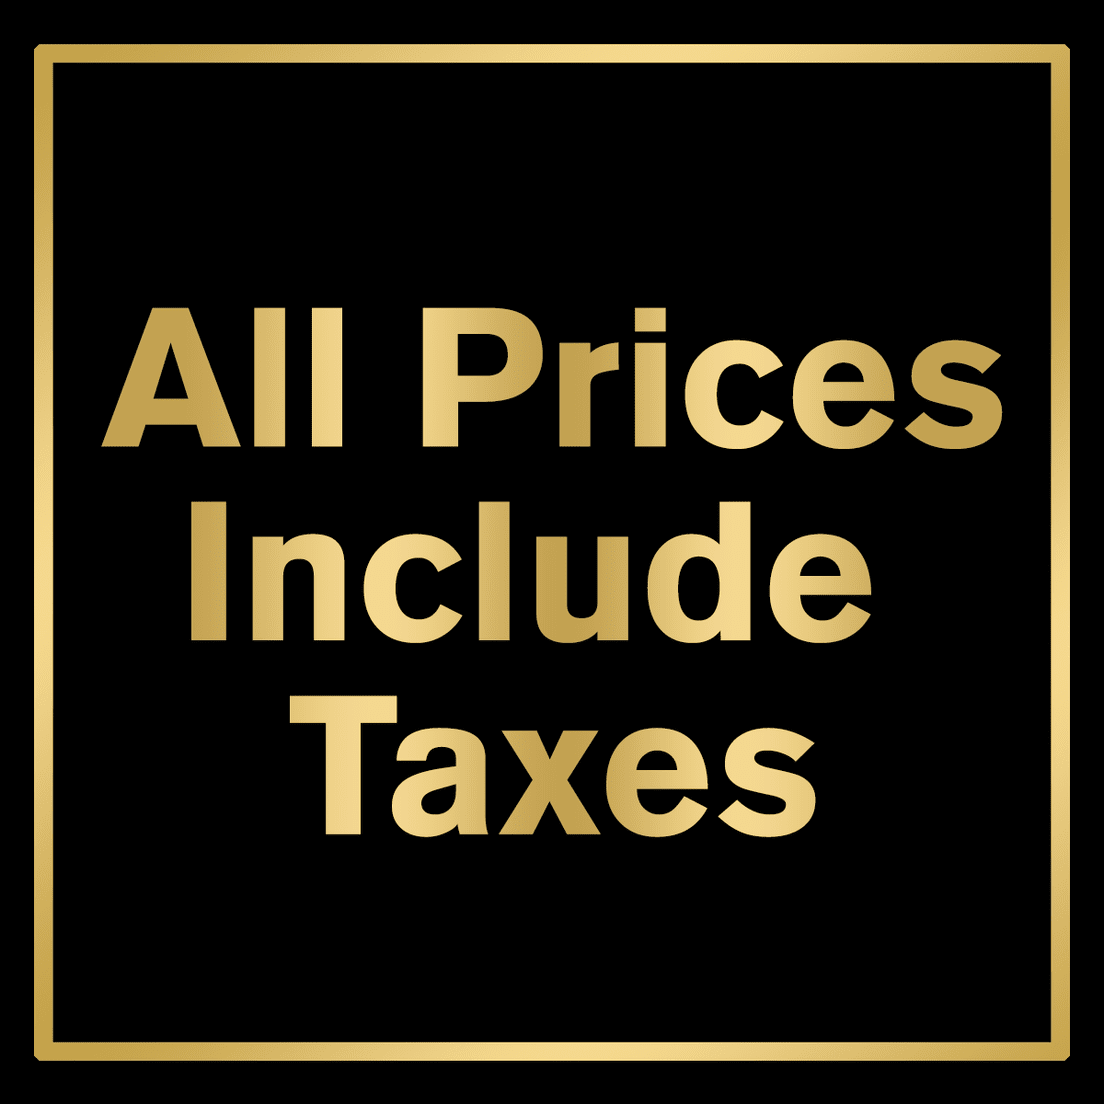 *ALL PRICES INCLUDE TAXES!